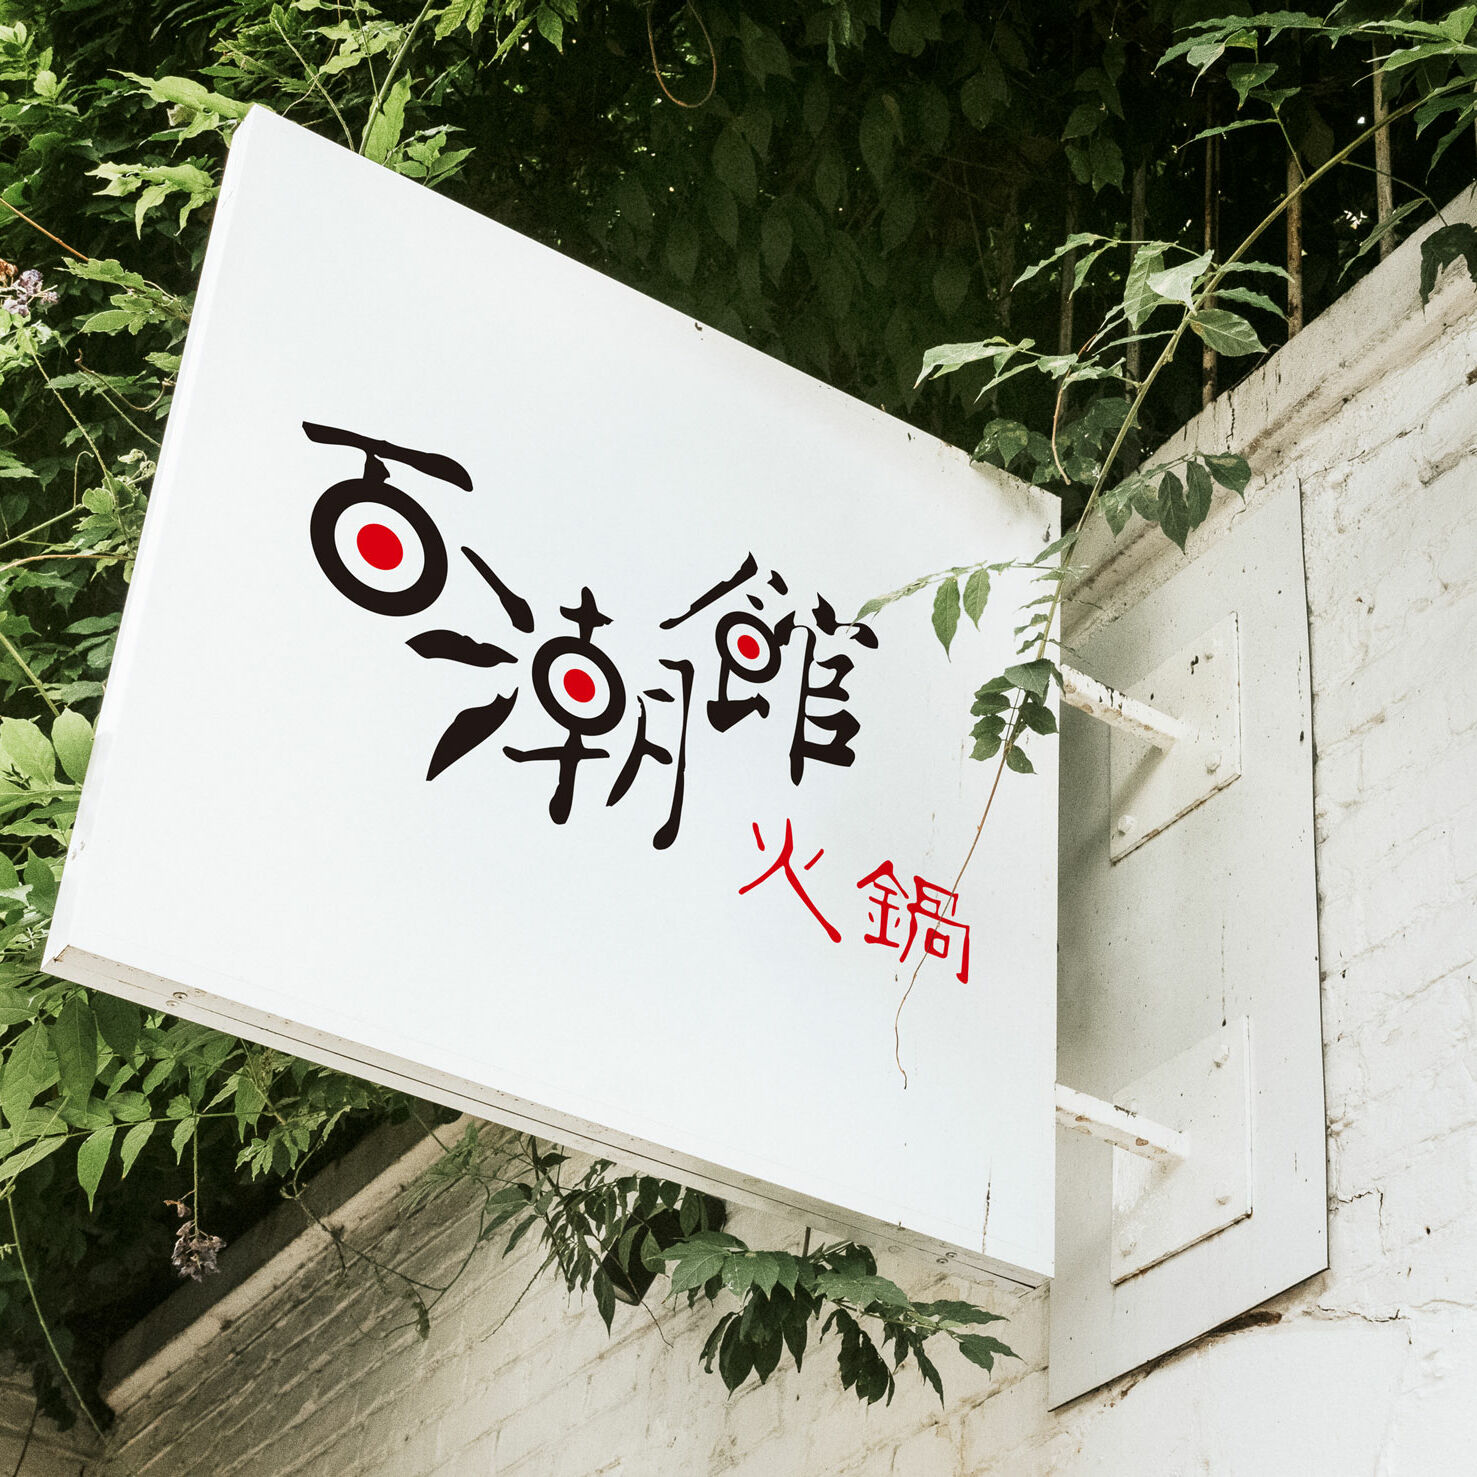 100 Trend Hotpot Sign On Wall